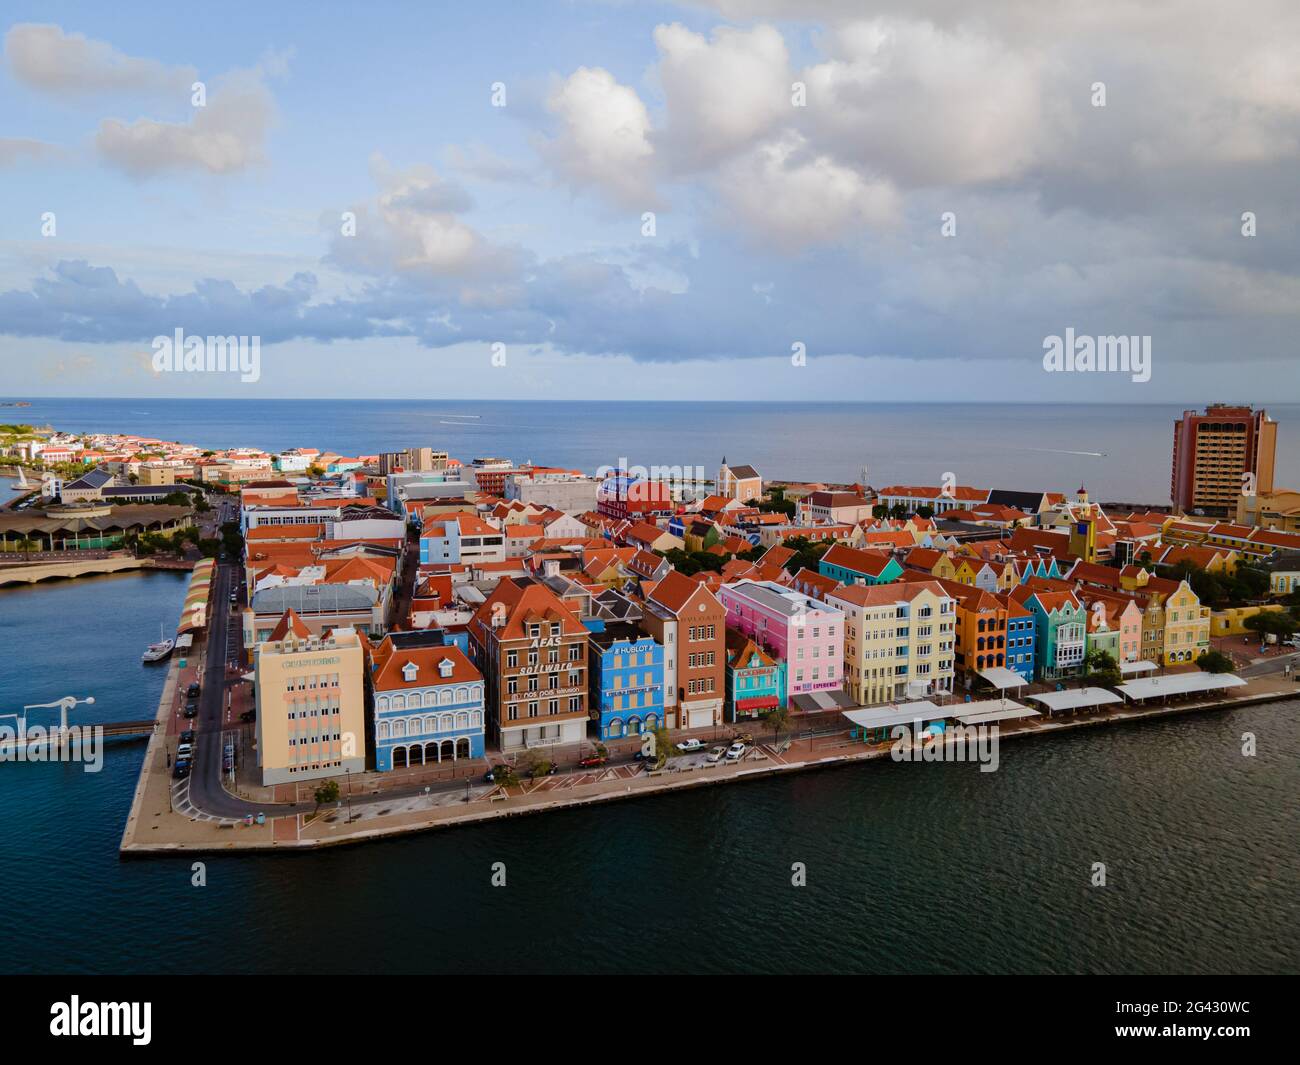 Willemstad, Curacao. Dutch Antilles. Colourful Buildings attracting tourists from all over the world. Blue sky sunny day Curacao Stock Photo